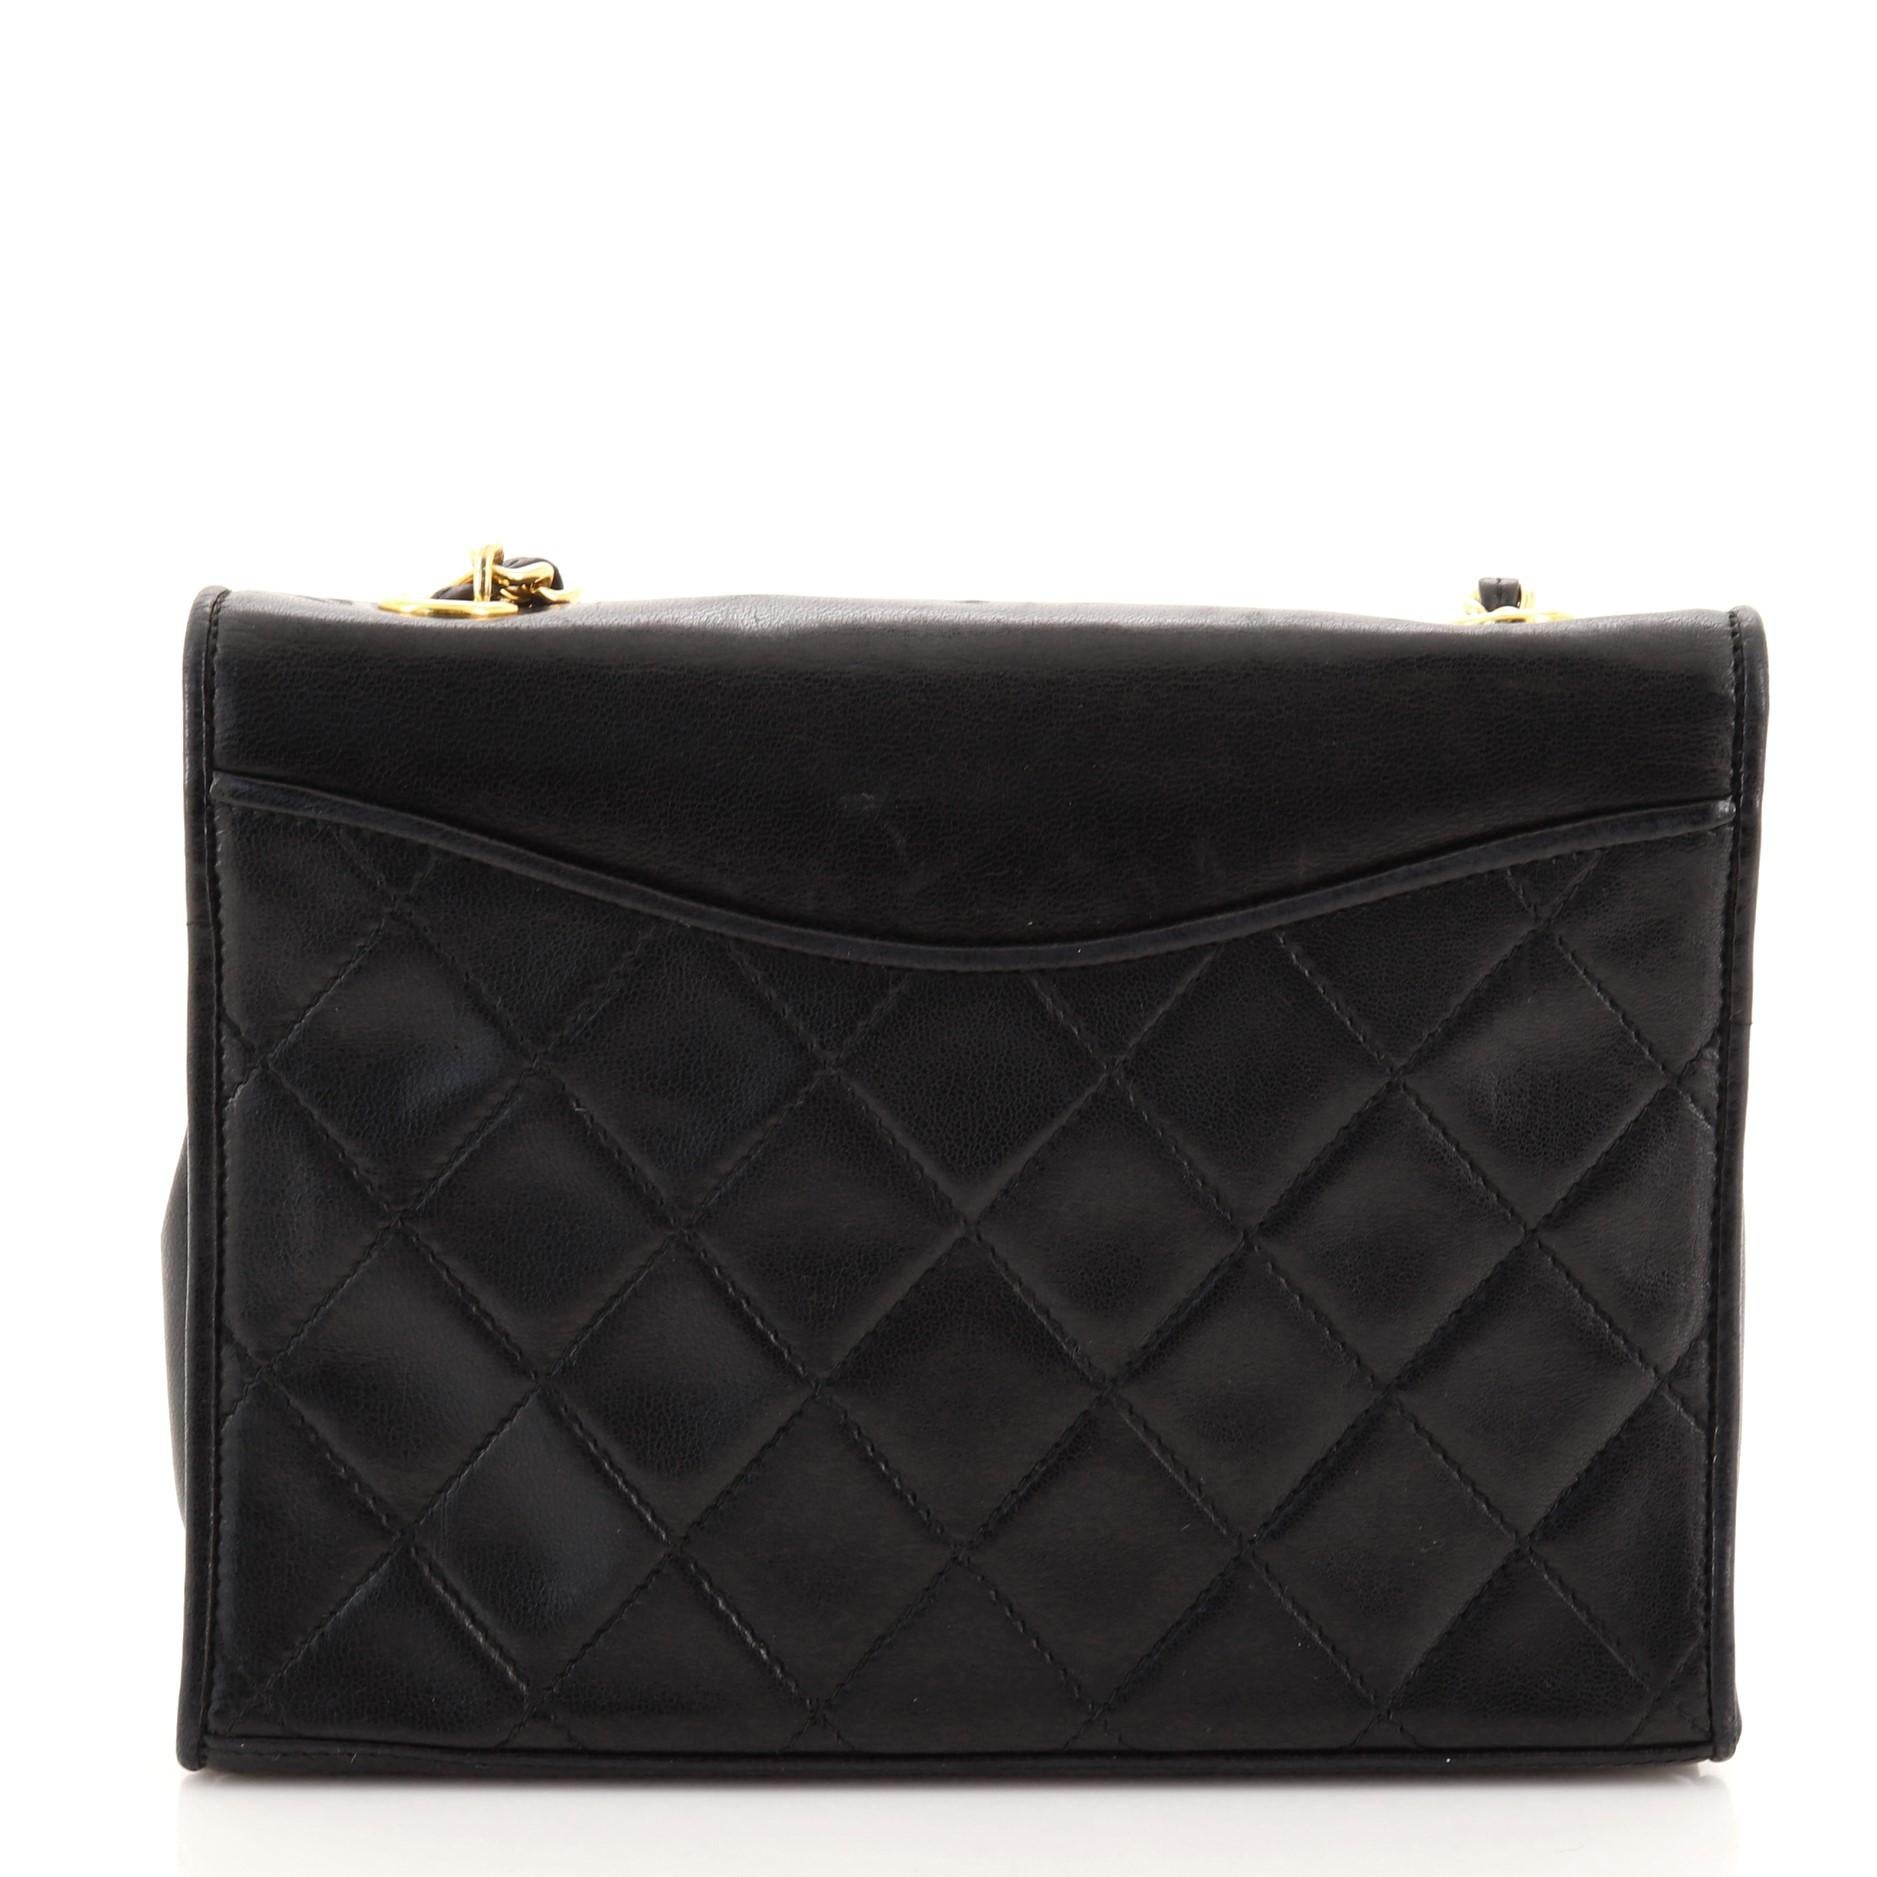 Black Chanel Vintage CC Full Flap Bag Quilted Lambskin Small